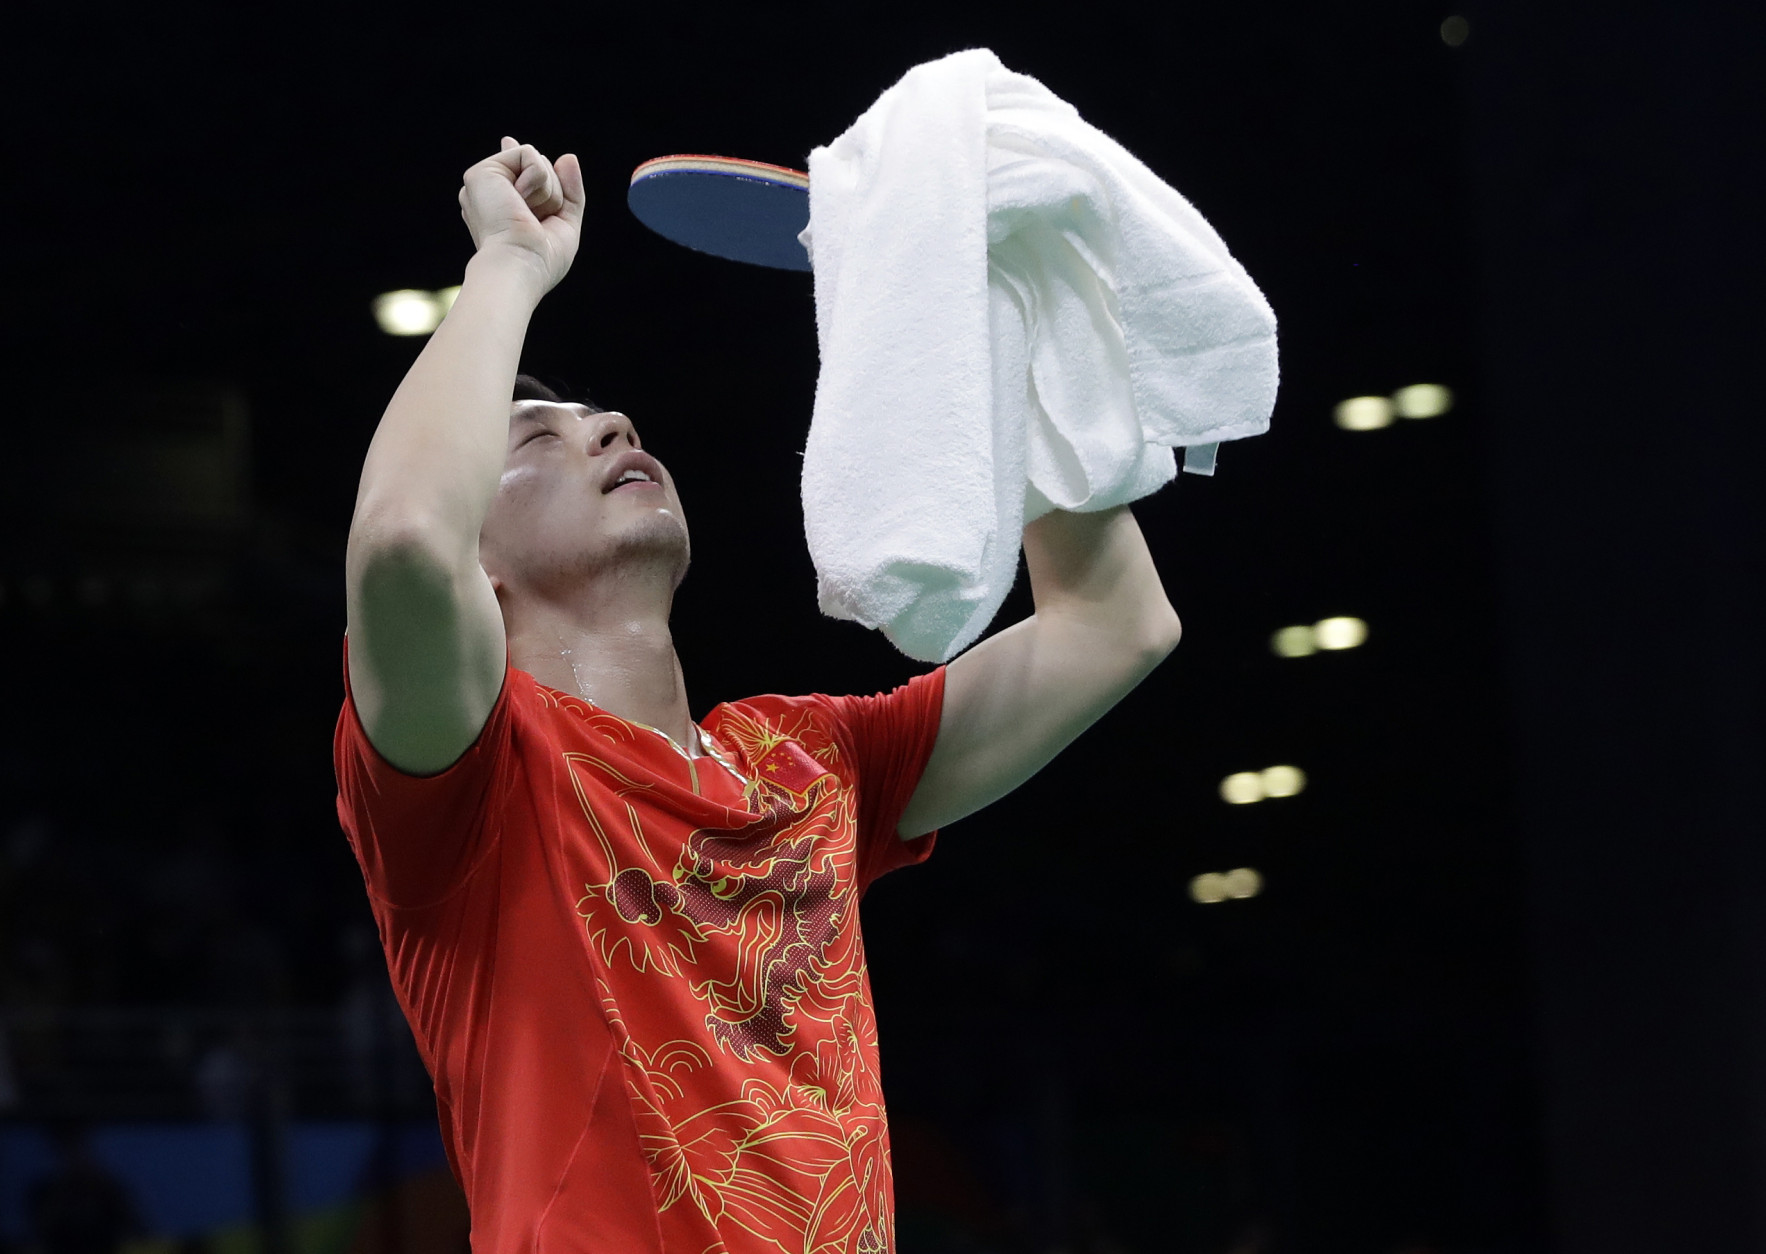 China's Ma Long celebrates after defeating Japan's Maharu Yoshimura in a singles match to win the gold medal for China in the men's team table tennis competition at the 2016 Summer Olympics in Rio de Janeiro, Brazil, Wednesday, Aug. 17, 2016. (AP Photo/Petros Giannakouris)